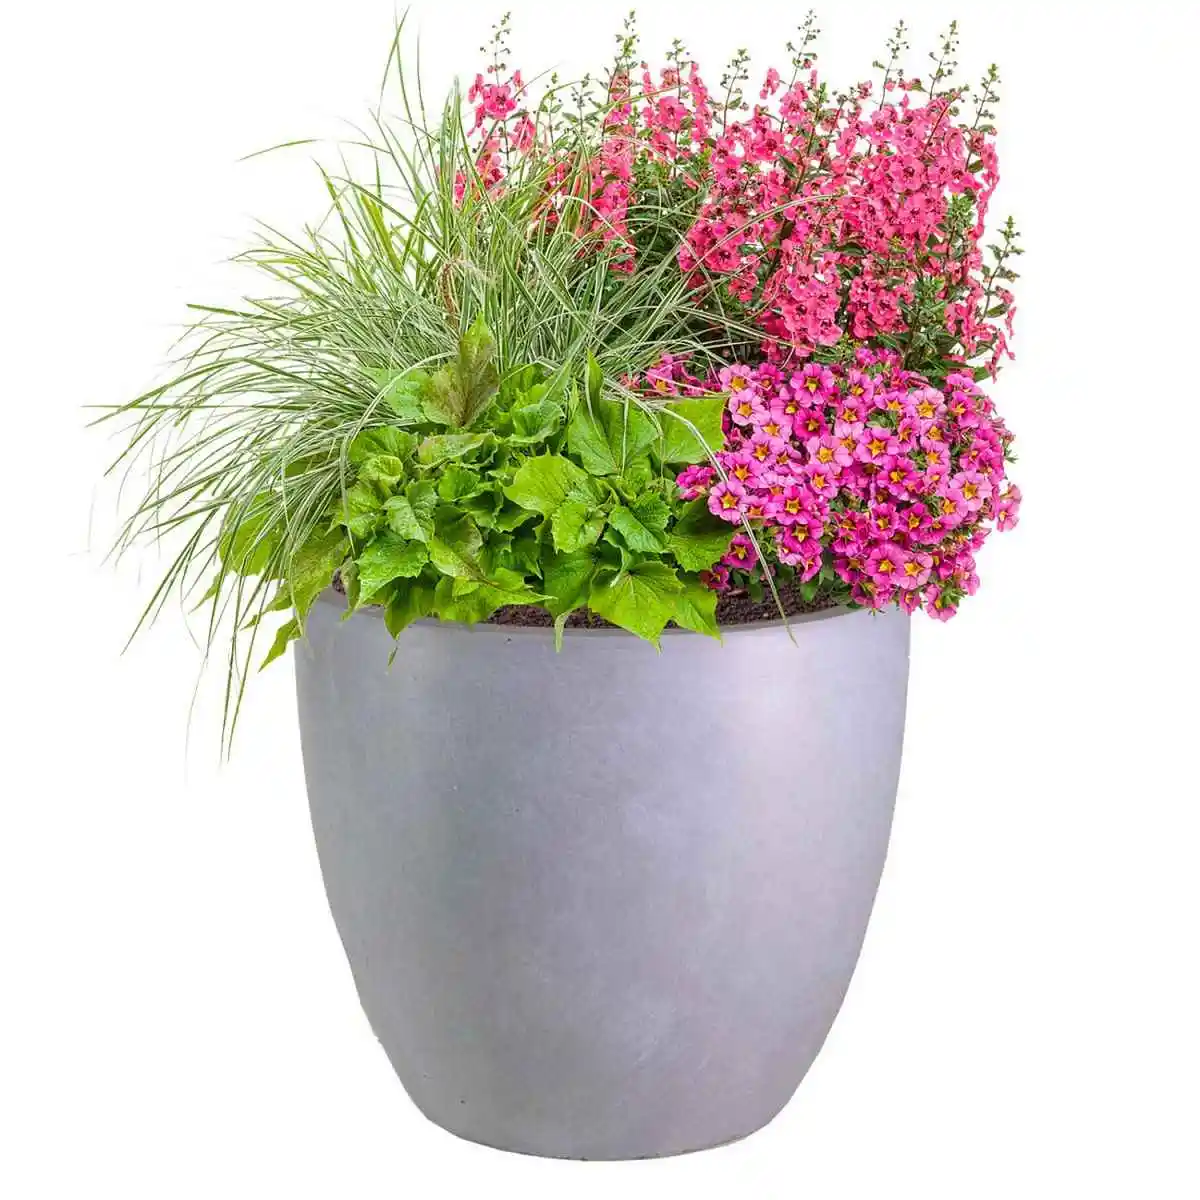 Getpotted: Up to 60% OFF Idealist Lite Planters